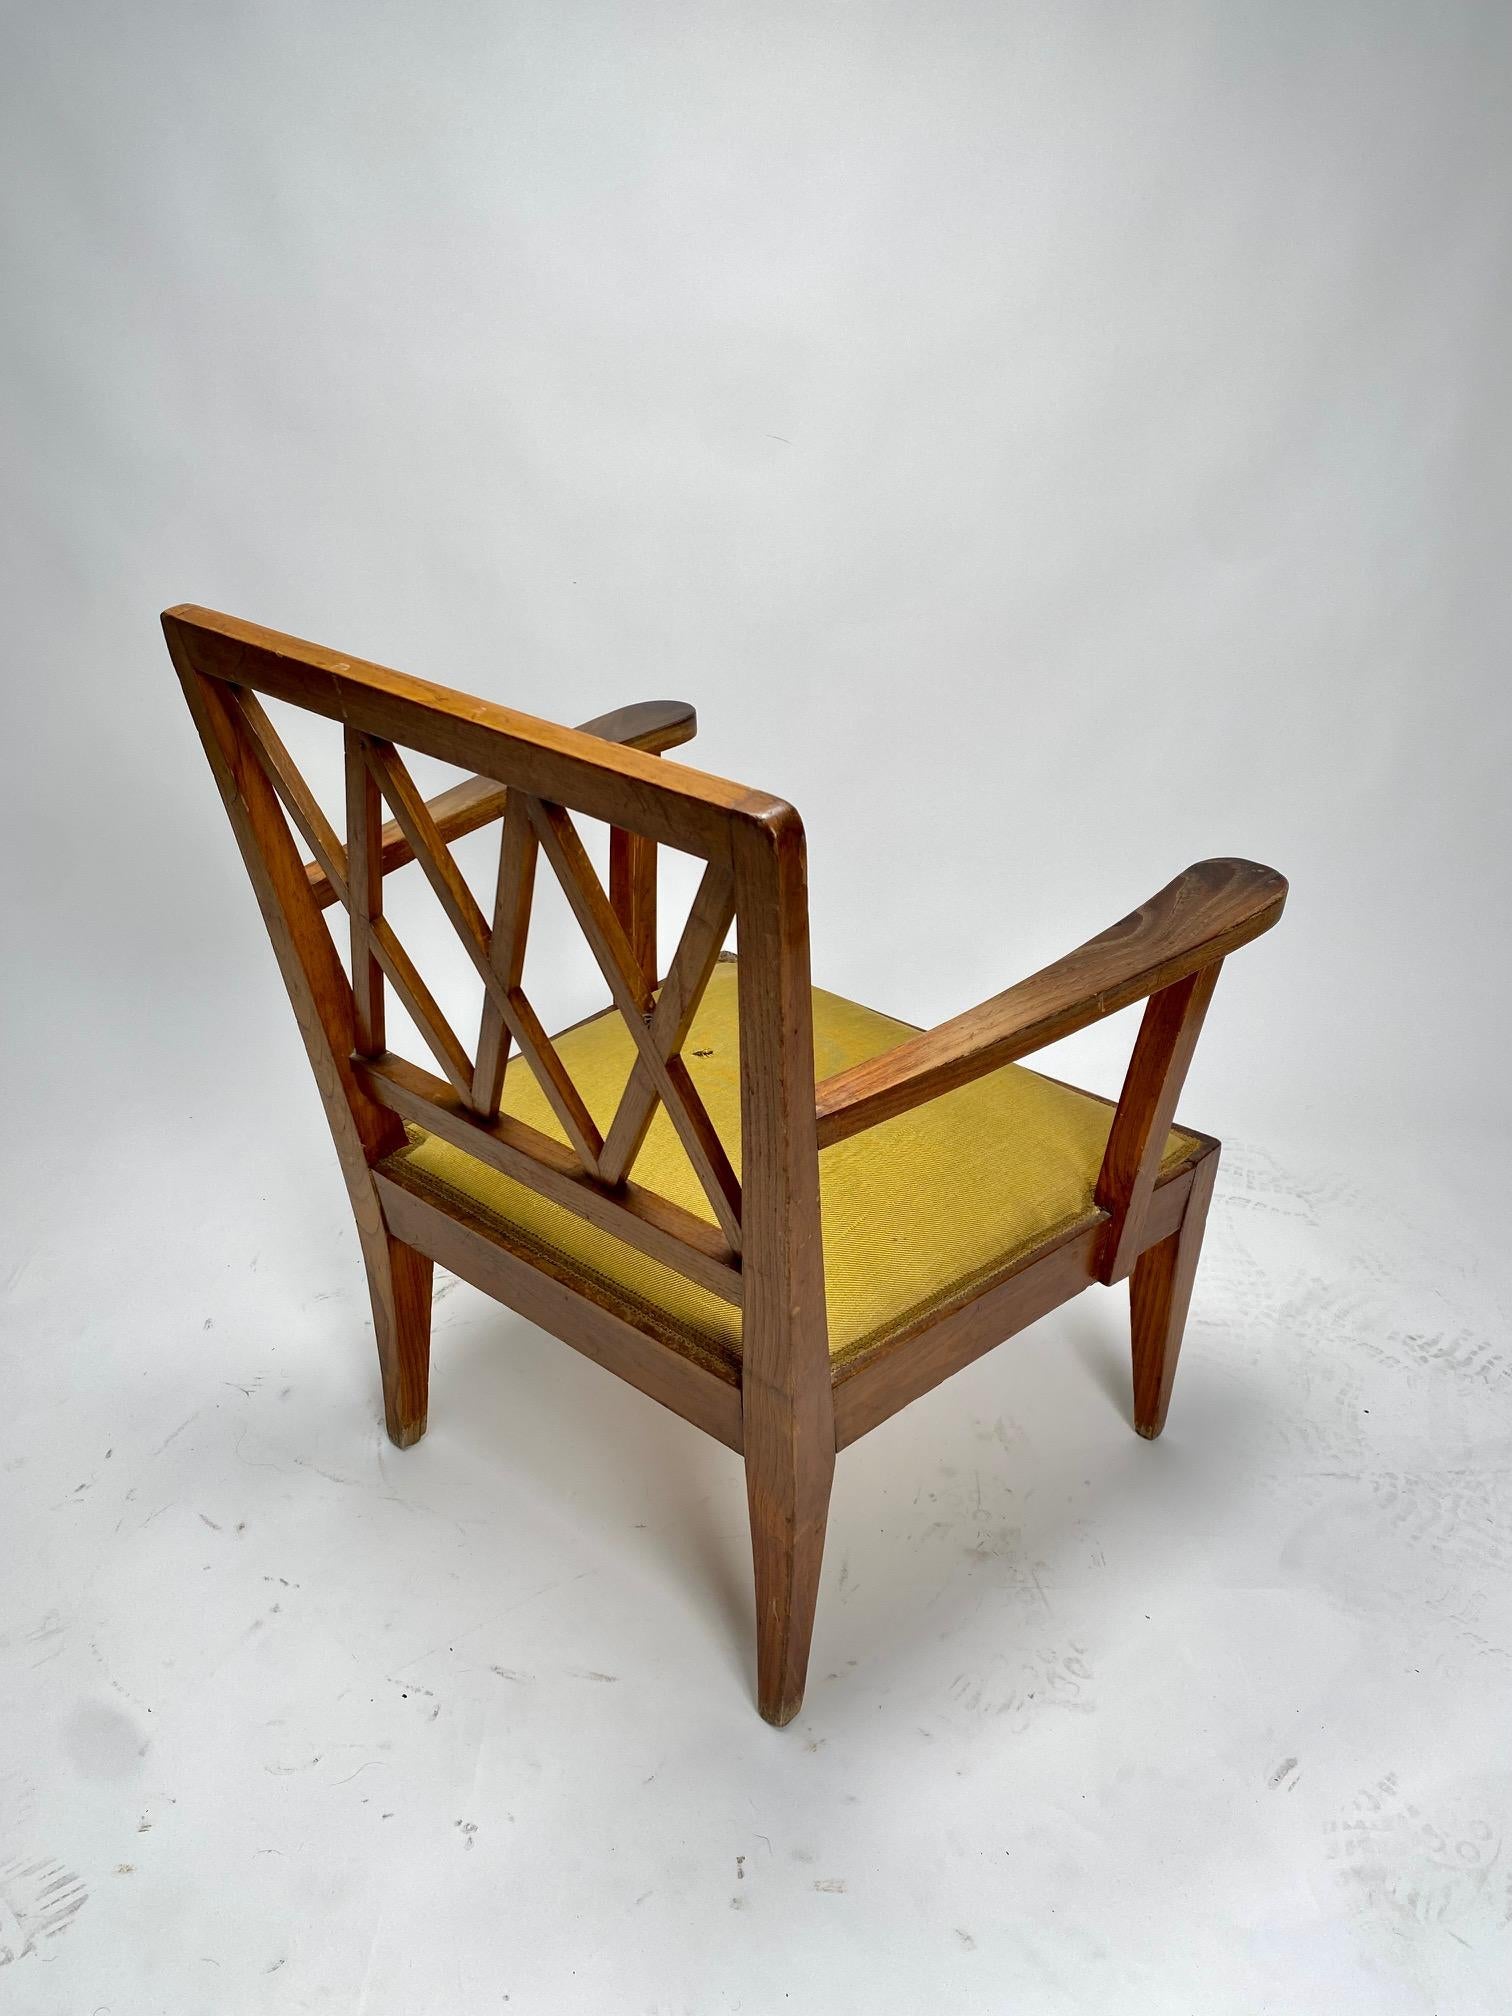 Sculptural wooden Armchair, Gio Ponti Style, Italy, 1930s For Sale 1